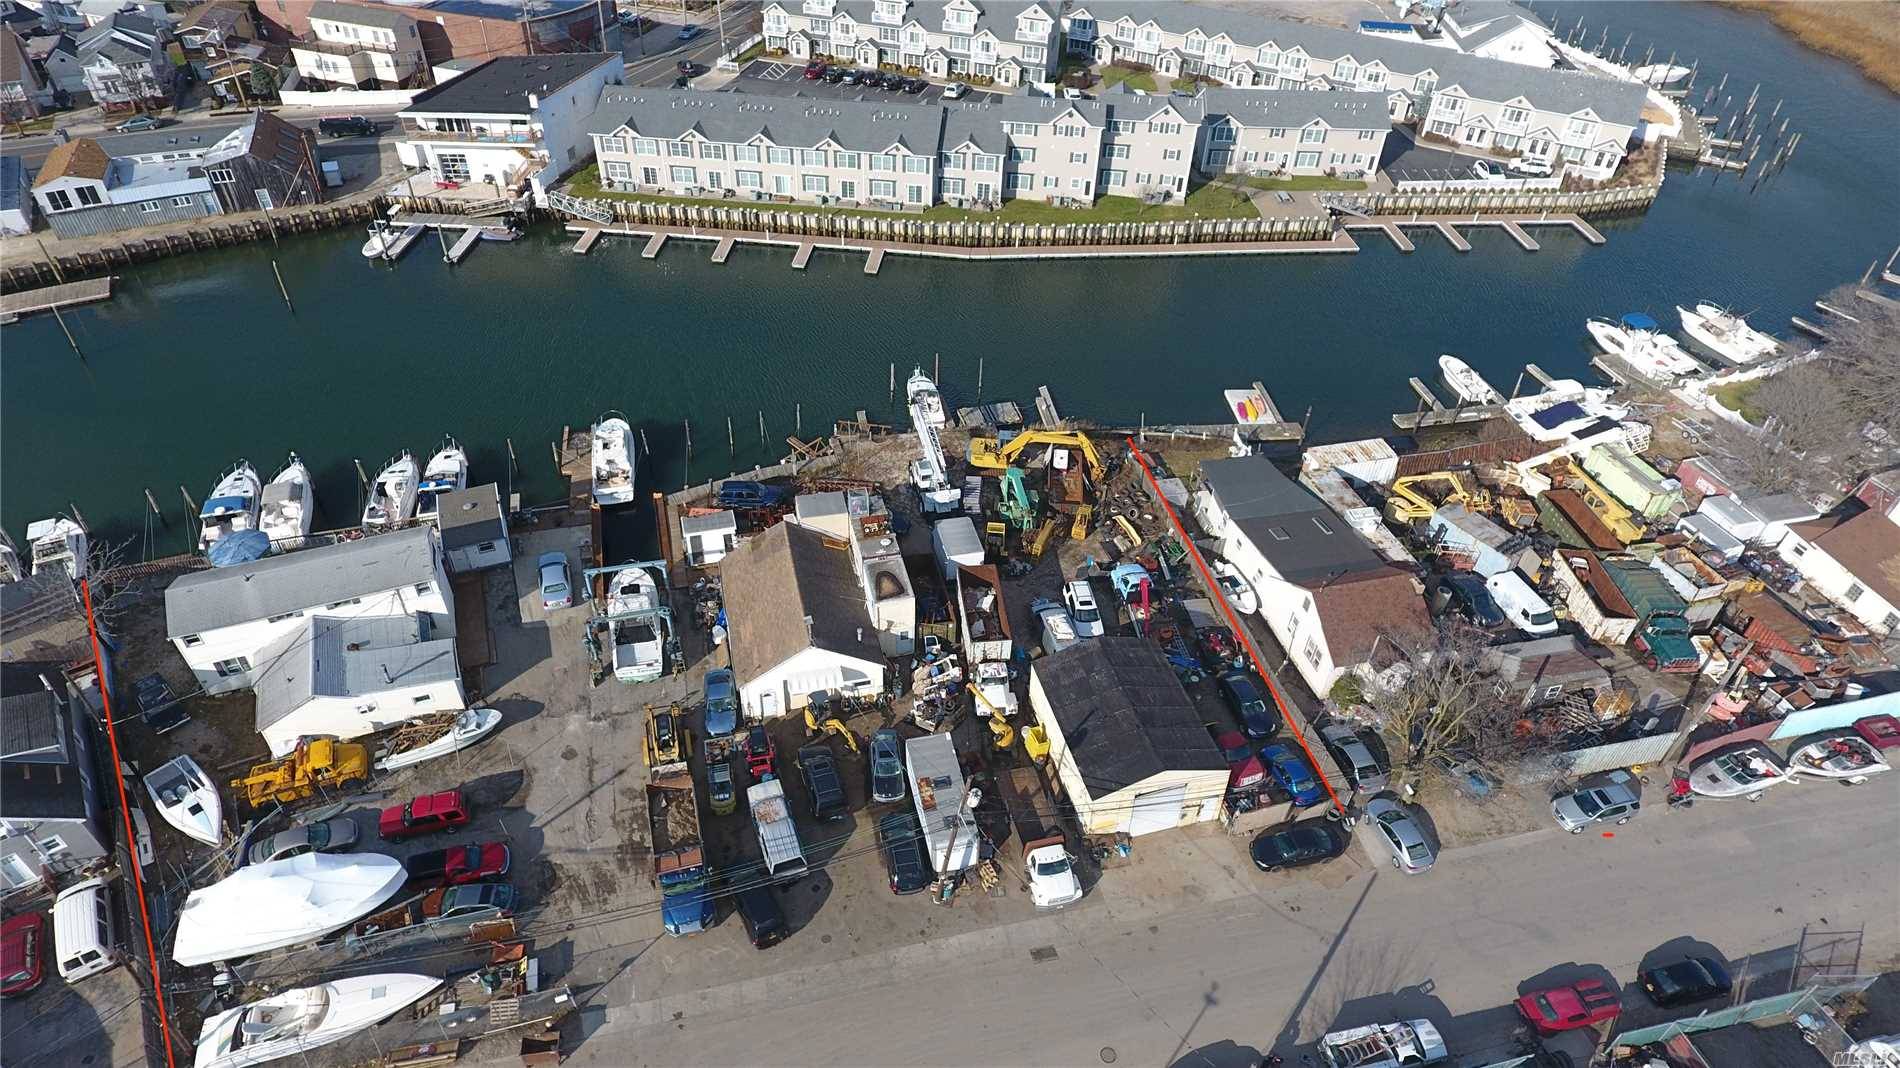 Marina Facility, Residential Property, Mechanic Shop And Vacant Land.